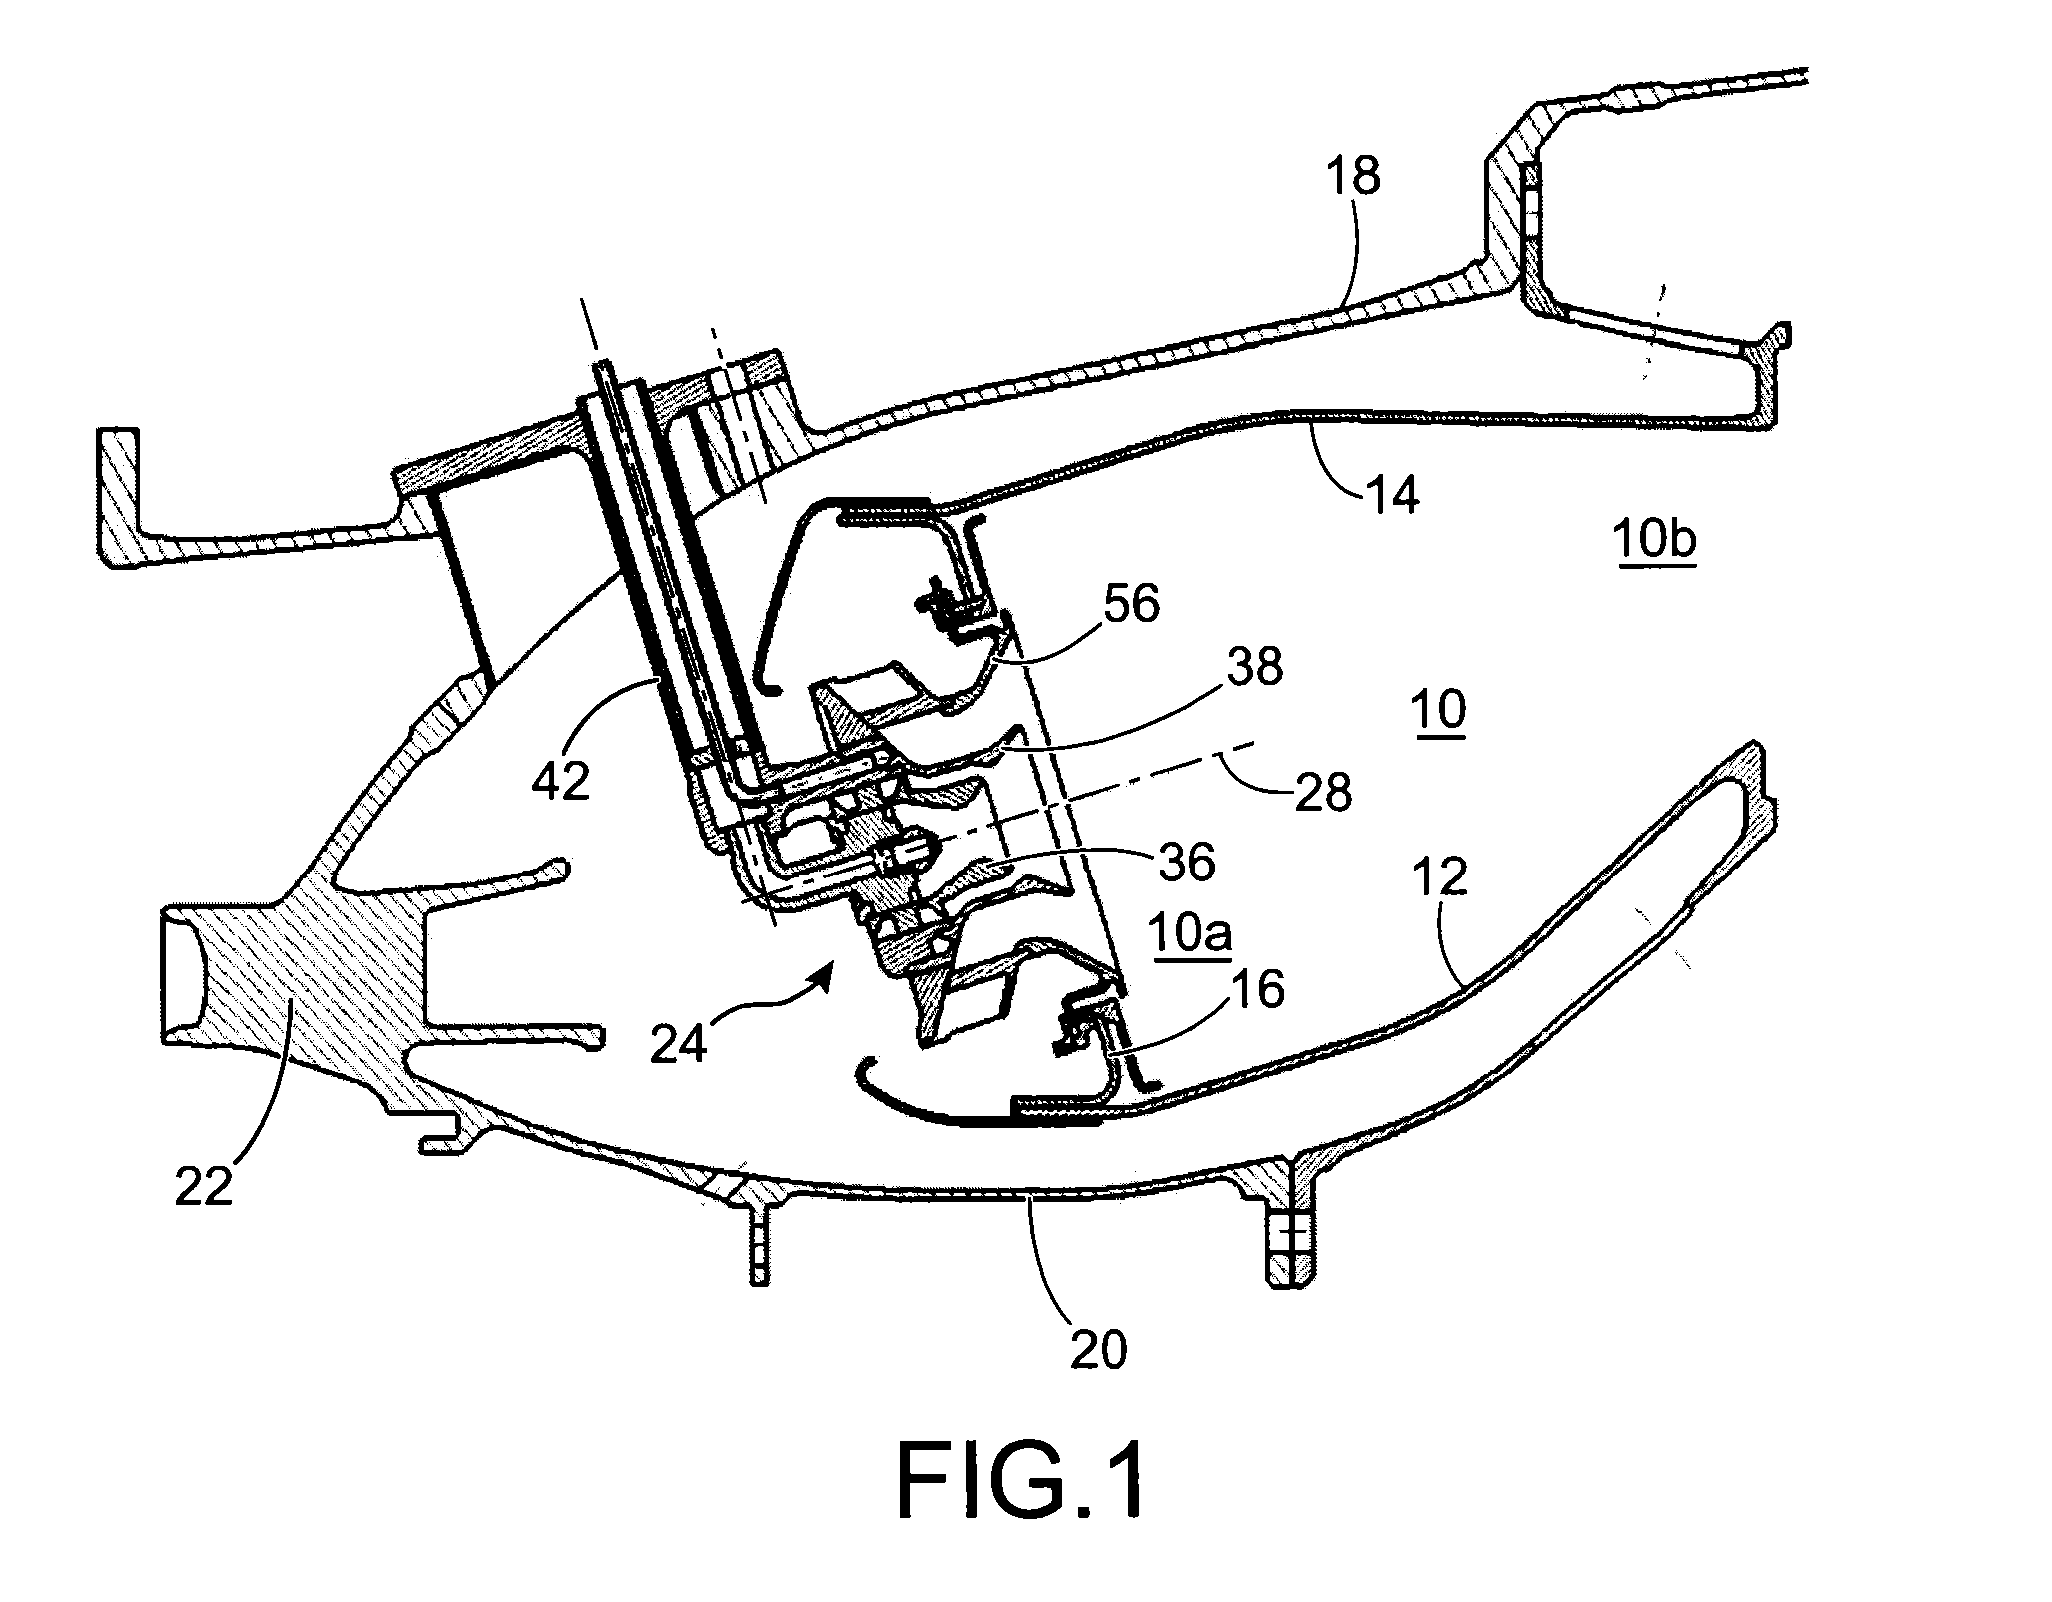 Injection system for a turbomachine combustion chamber, including air injection means improving the air-fuel mixture